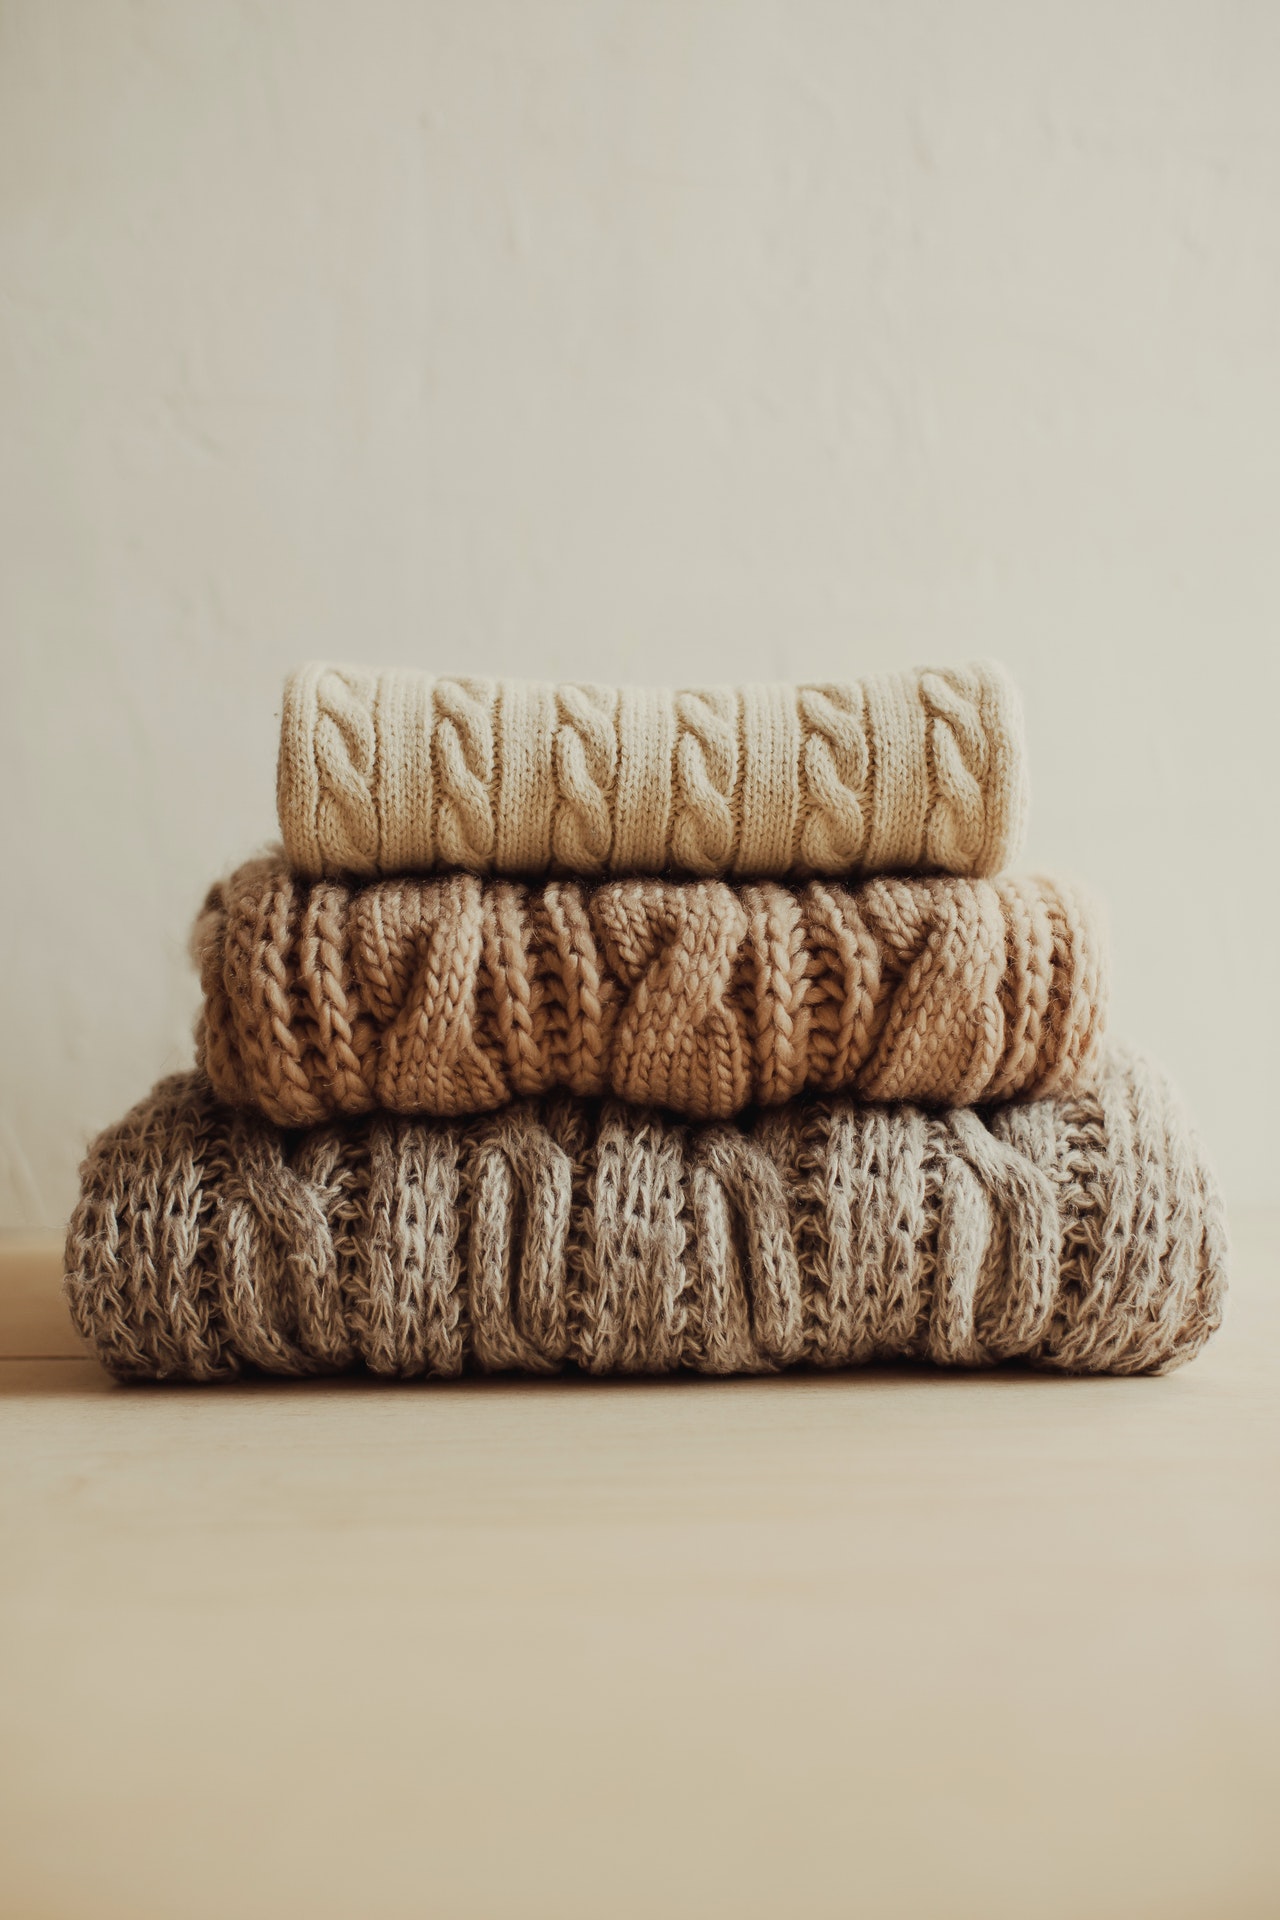 Stack of folded wooly jumpers